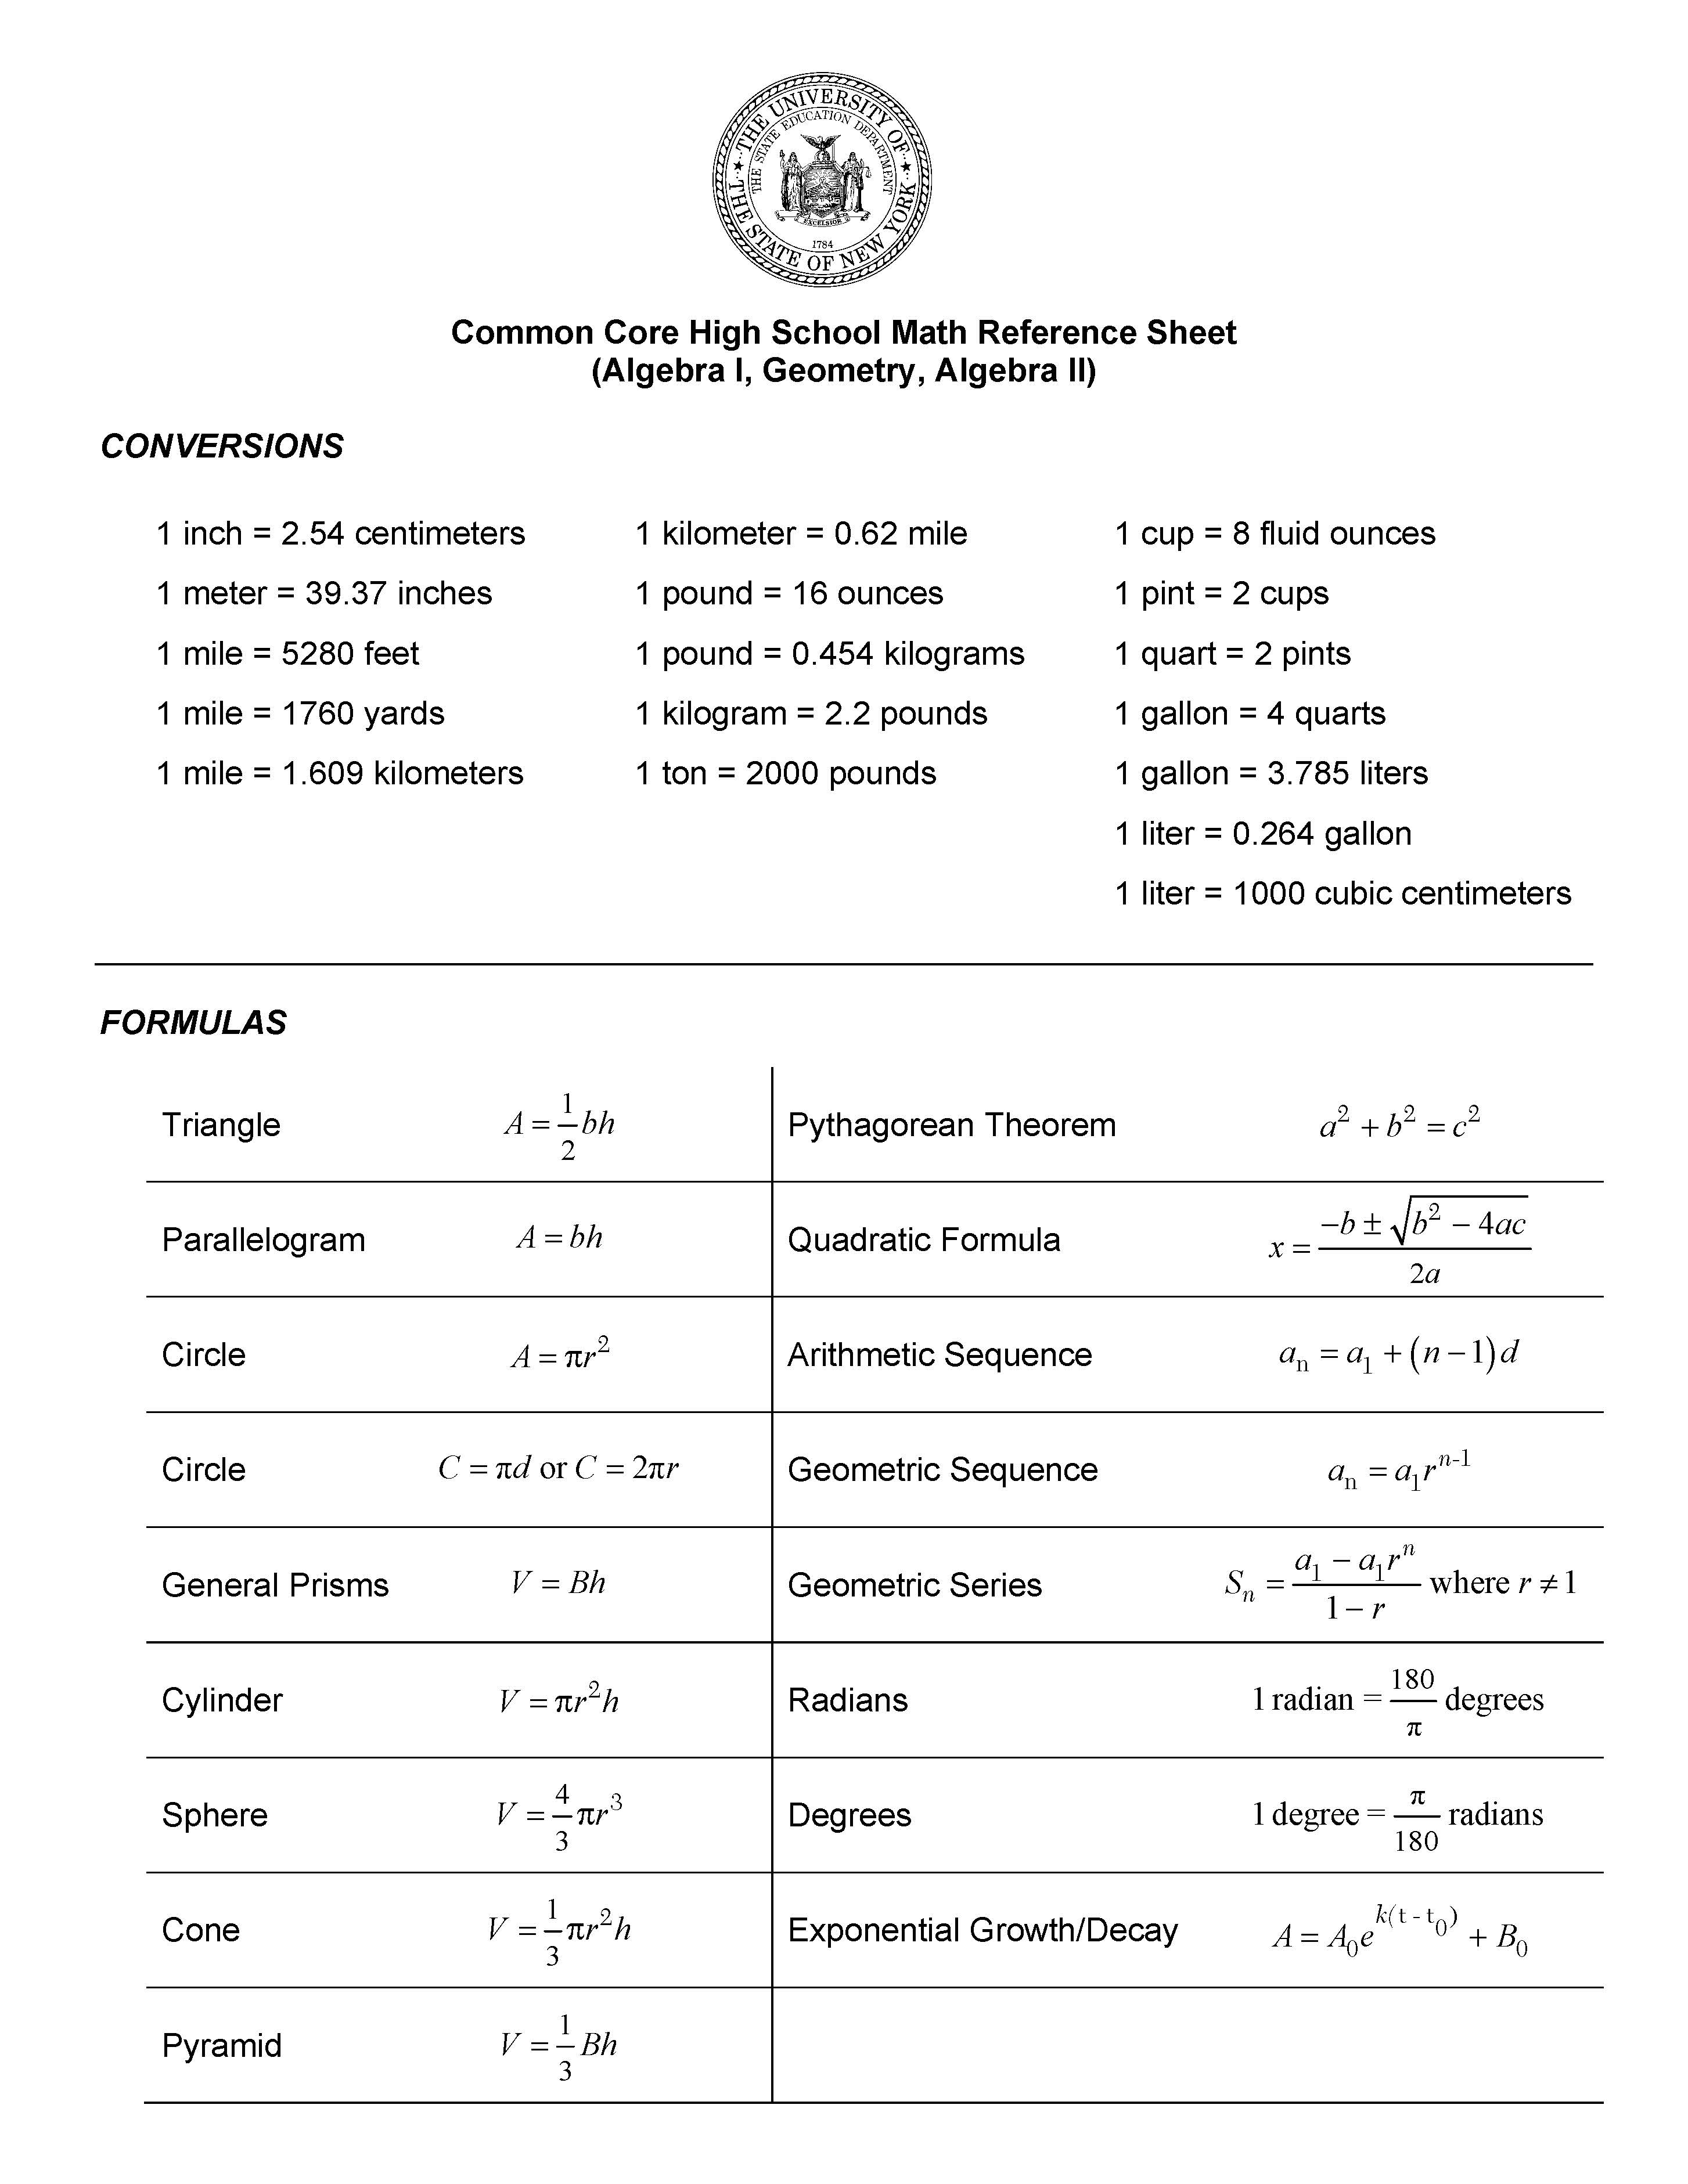 JMAP EXTRAS formula sheets, grids, curves and other math resources